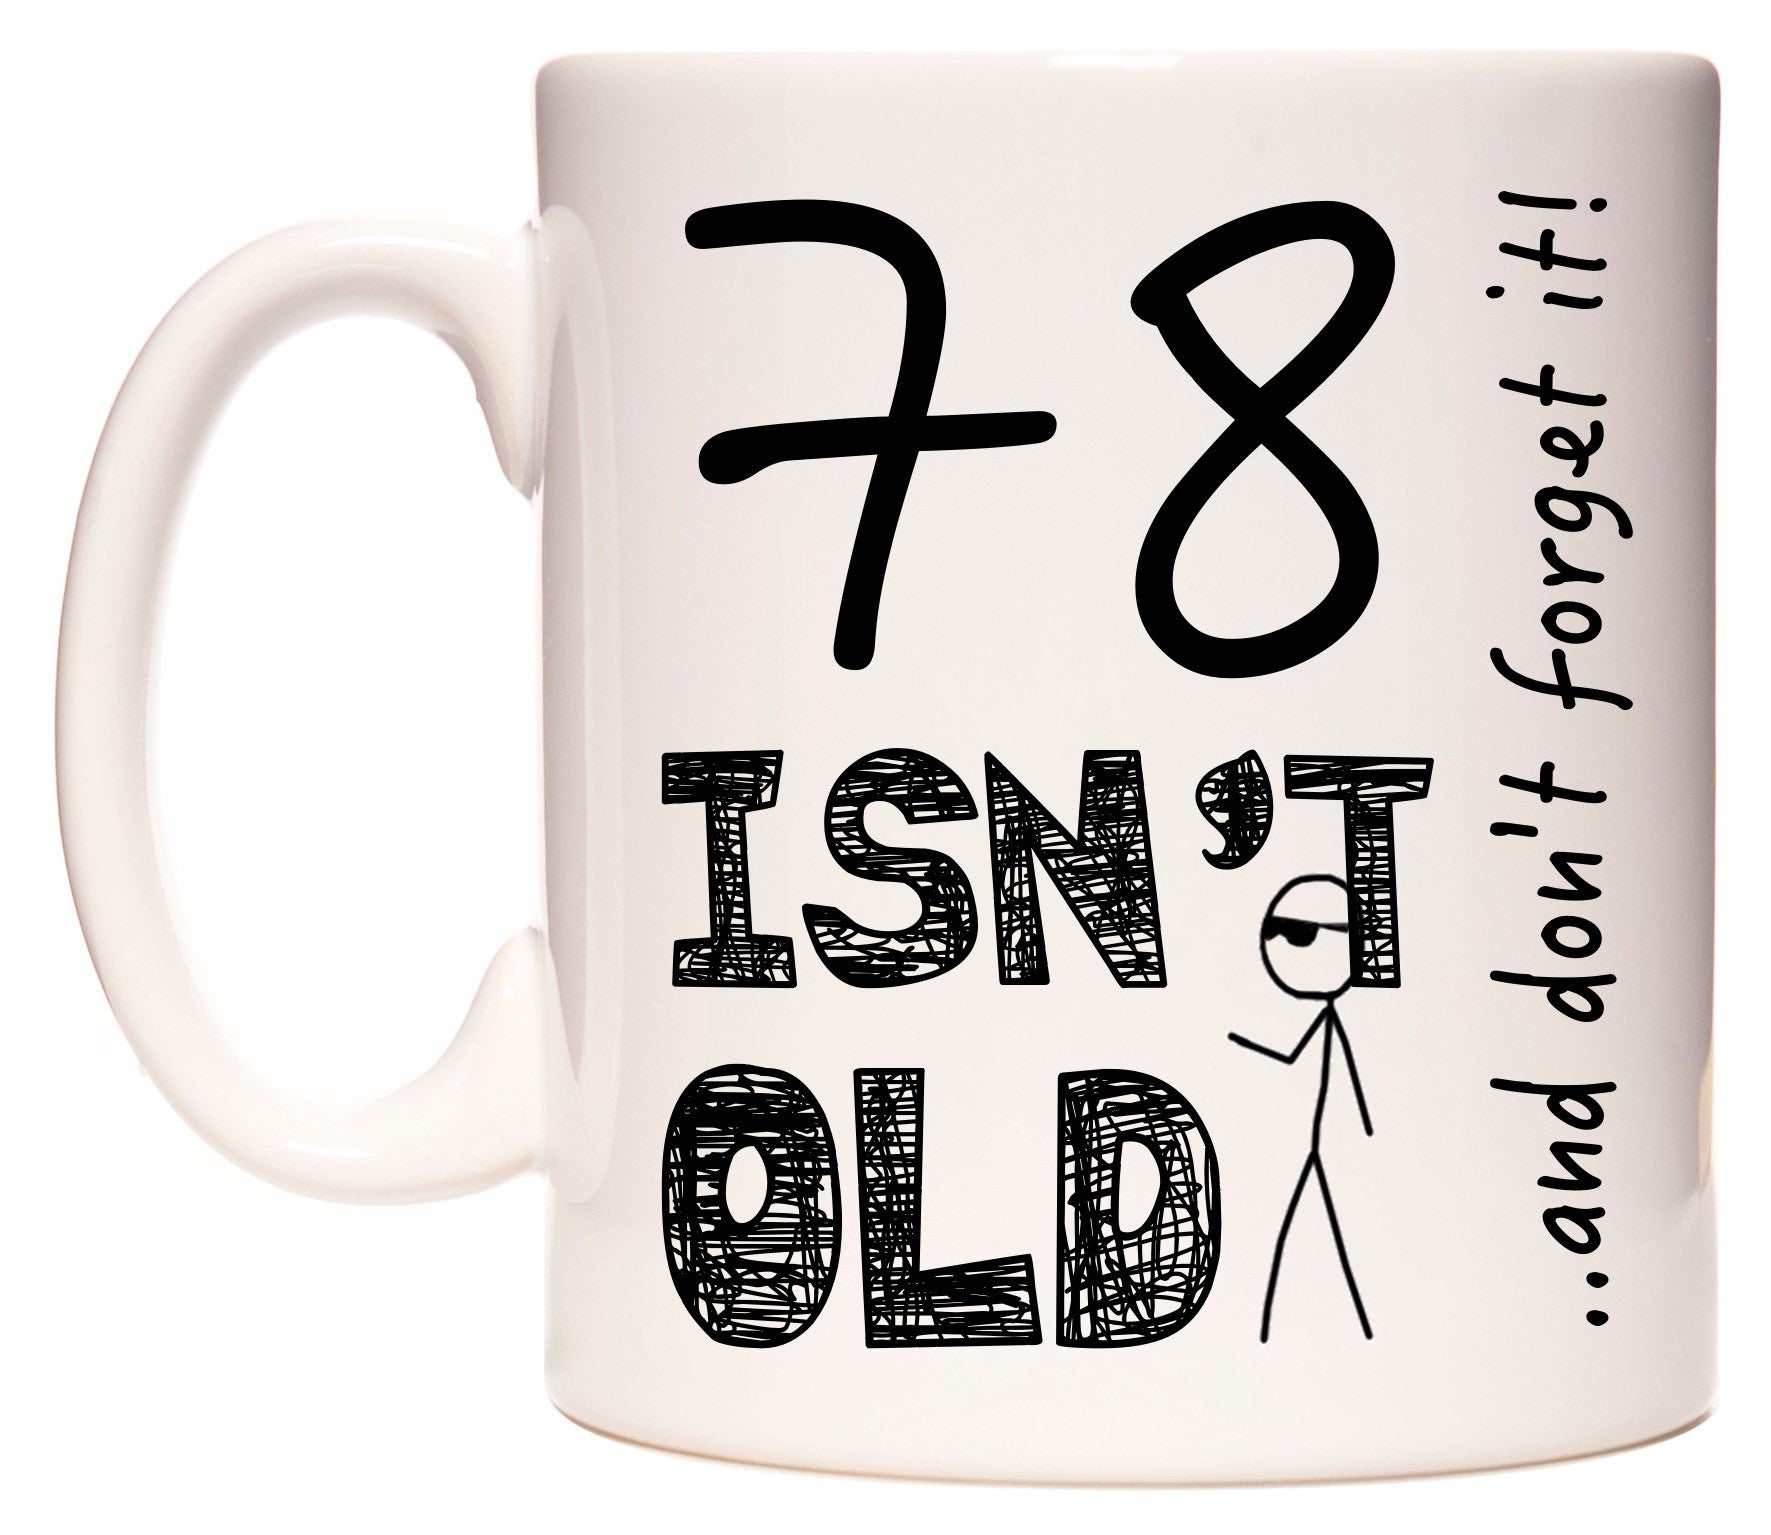 This mug features 78 Isn't Old